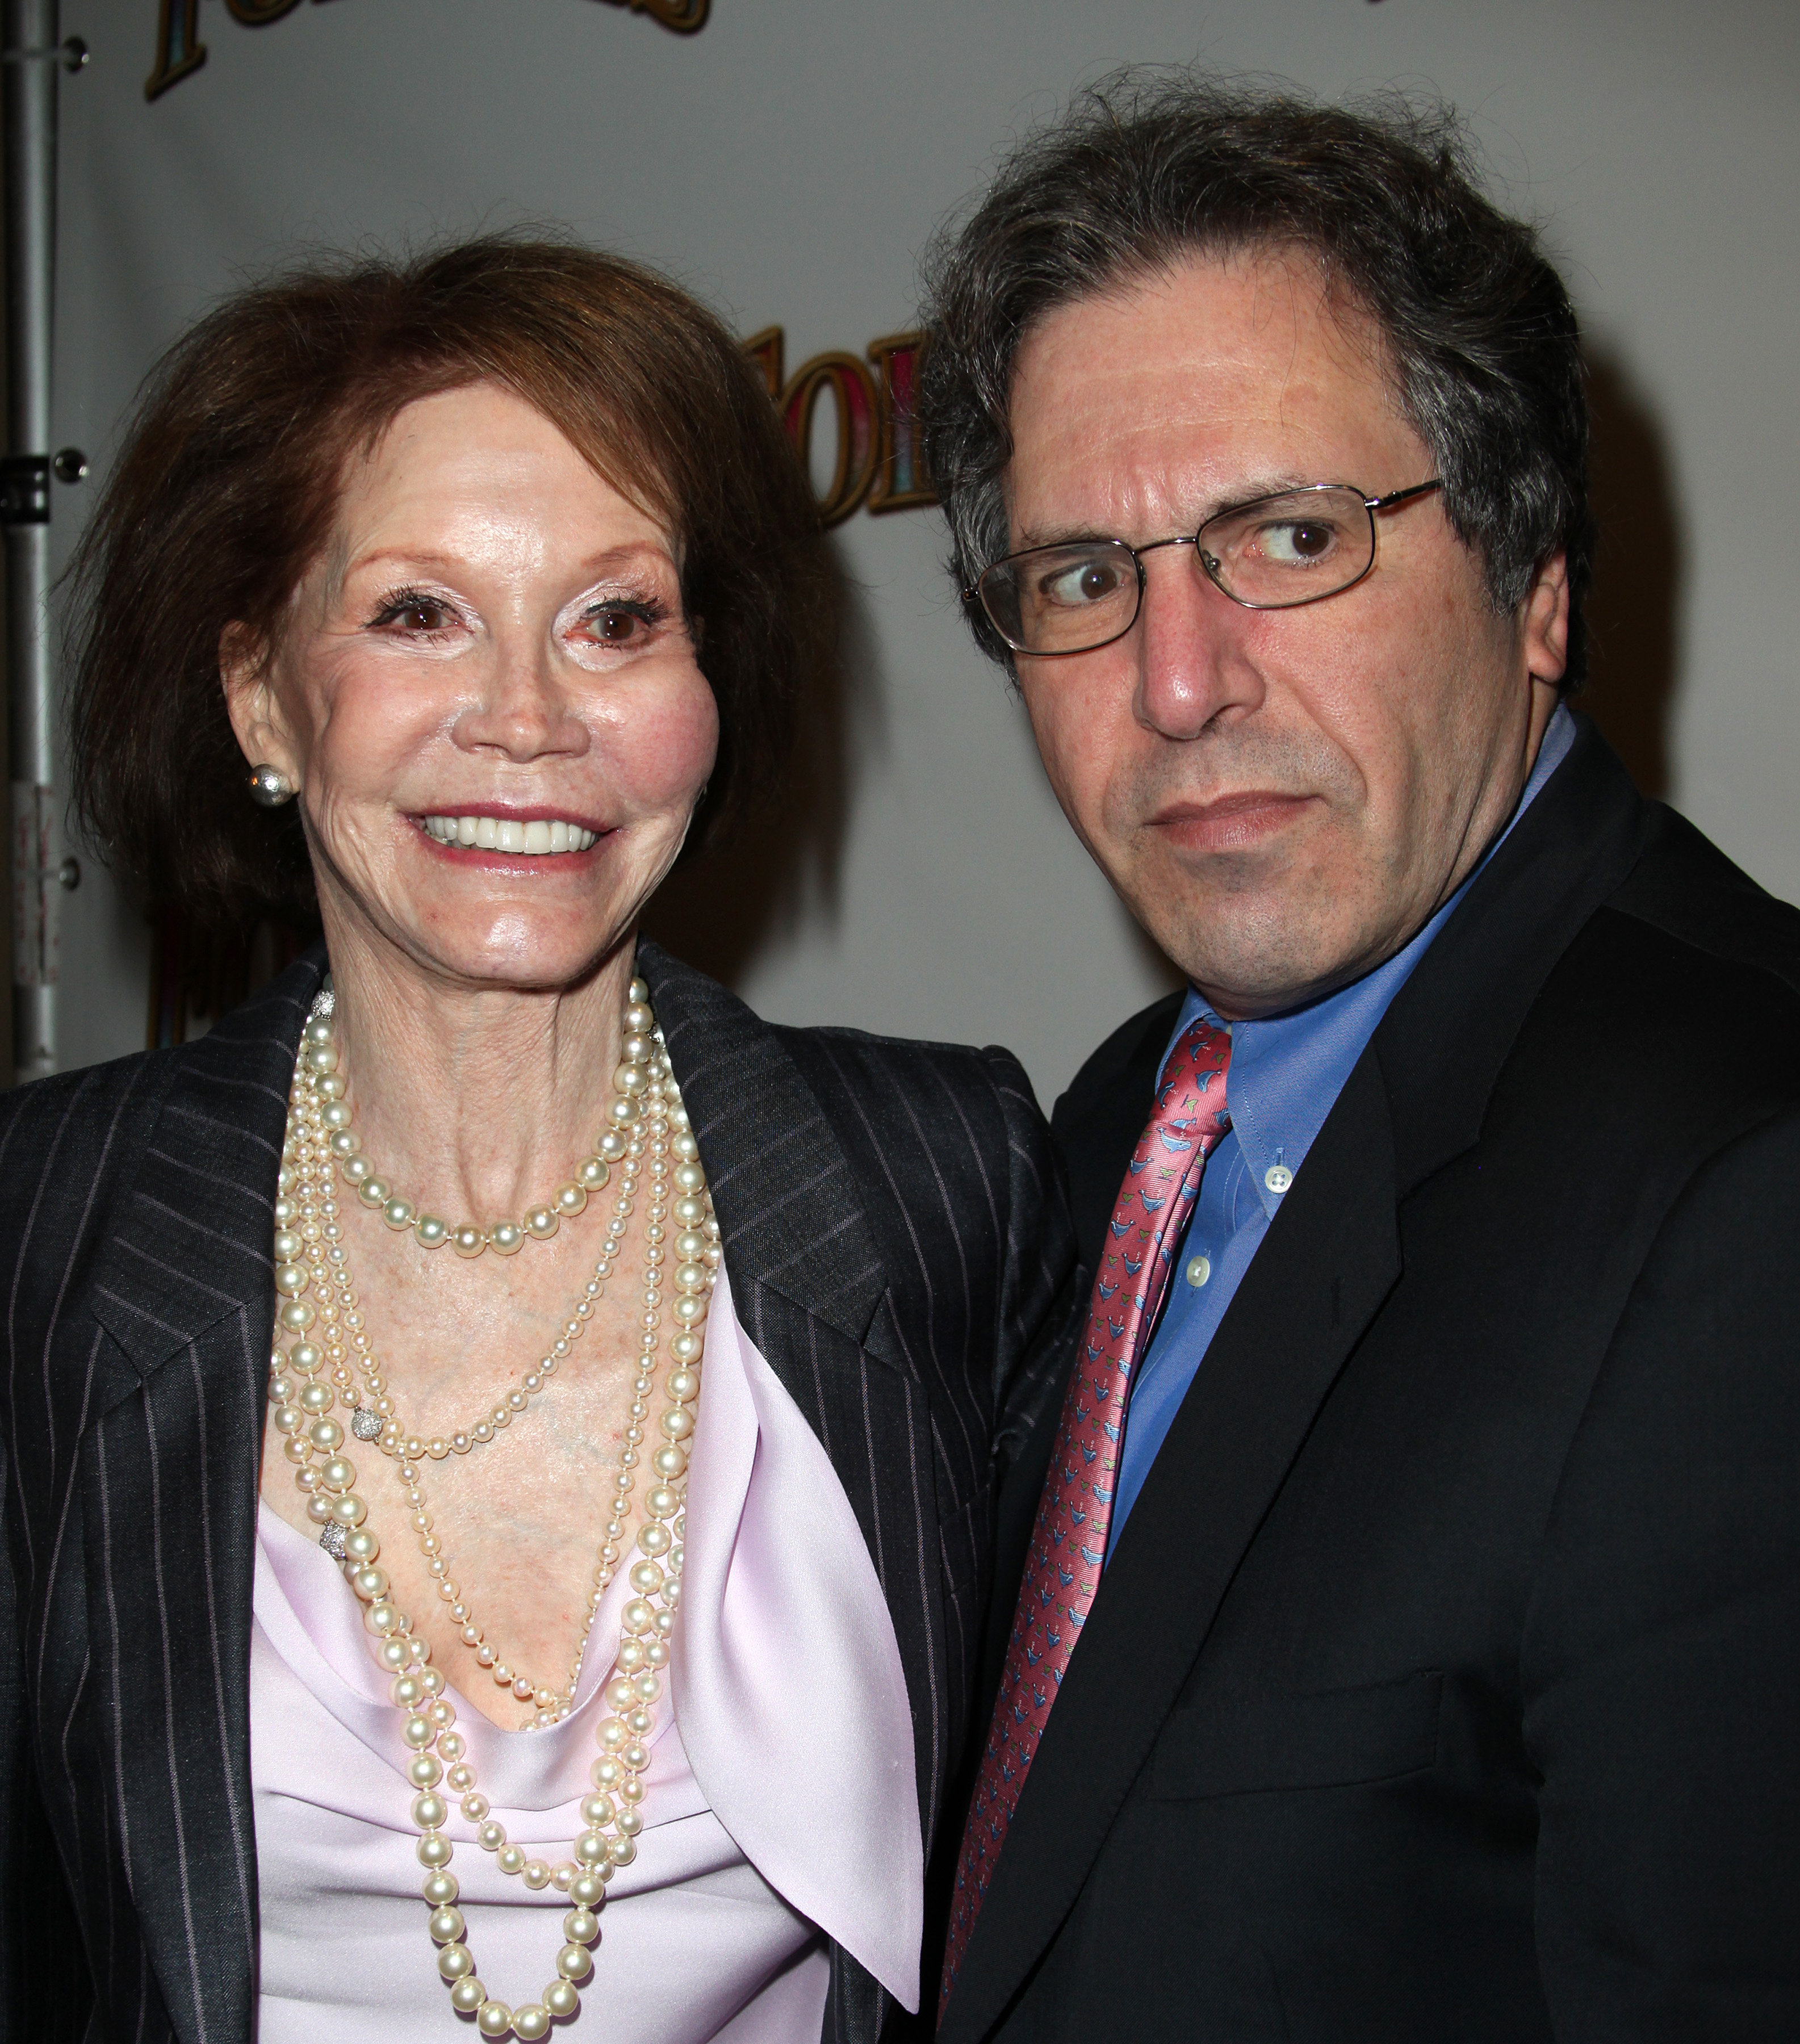 Mary Tyler Moore & husband Dr. Robert Levine attending the Broadway opening night performance of "Follies" at the Marquis Theatre in New York City | Source: Getty Images